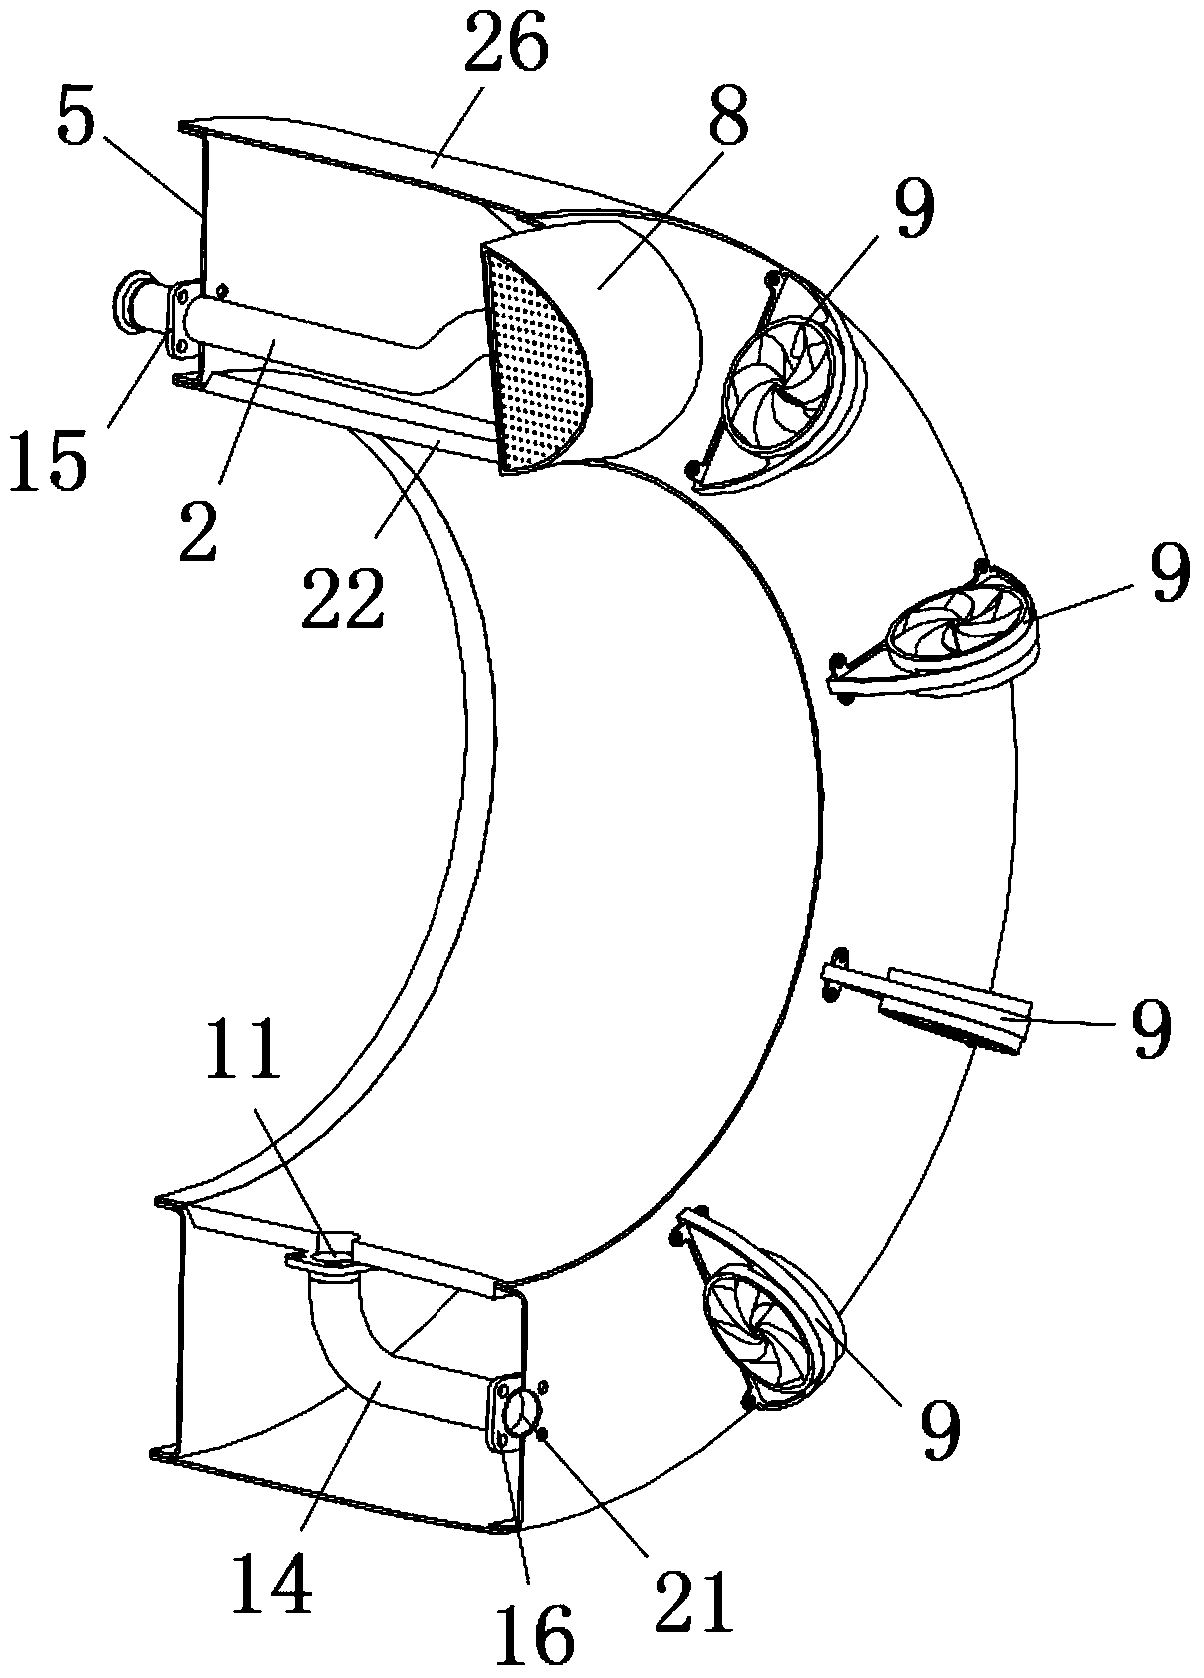 Engine gas inlet pipe anti-icing system and aircraft engine